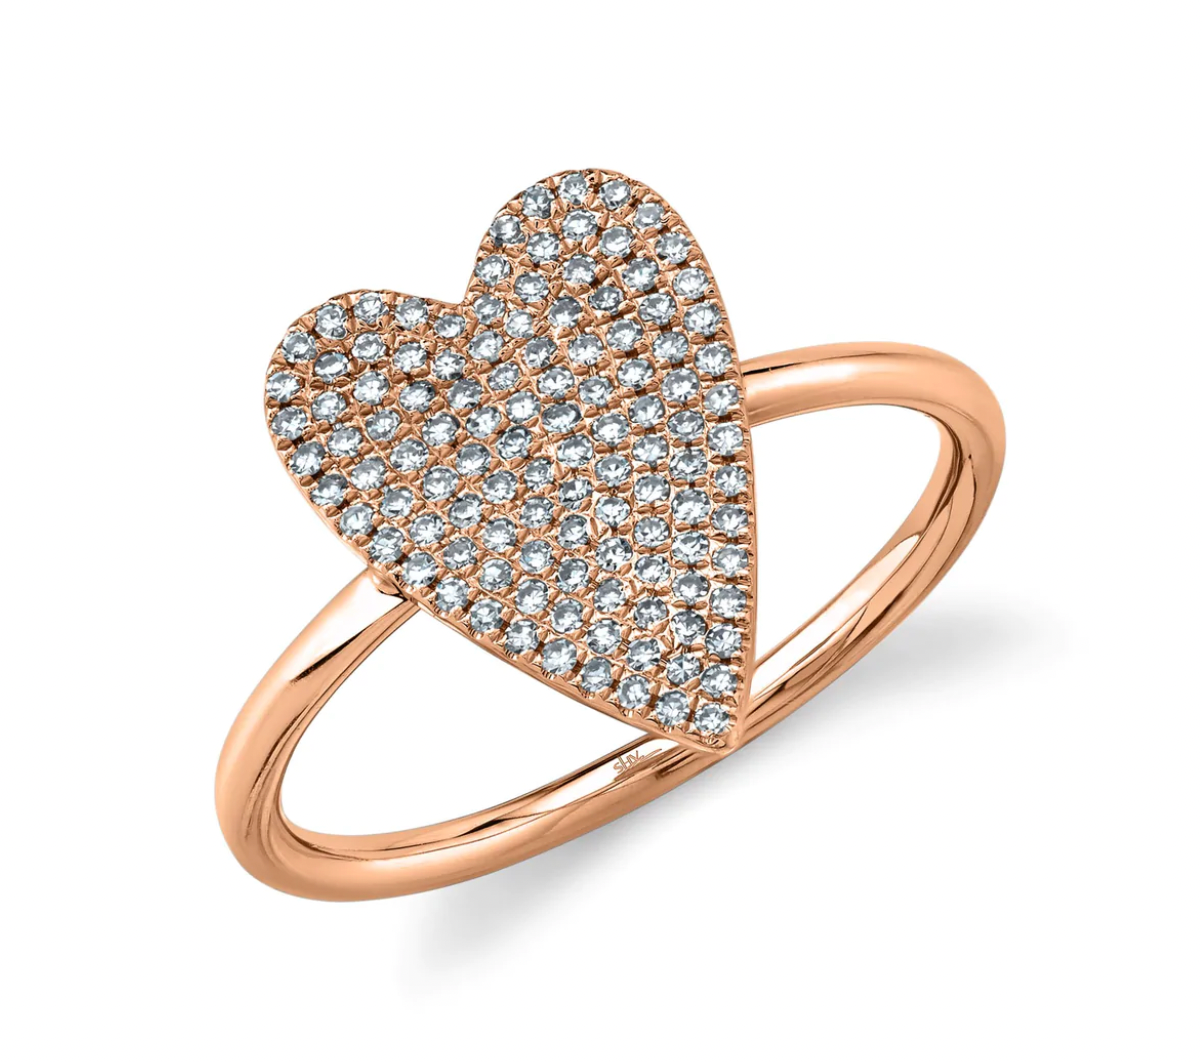 AMOR 0.26 CT DIAMOND PAVE HEART RING - SMALL